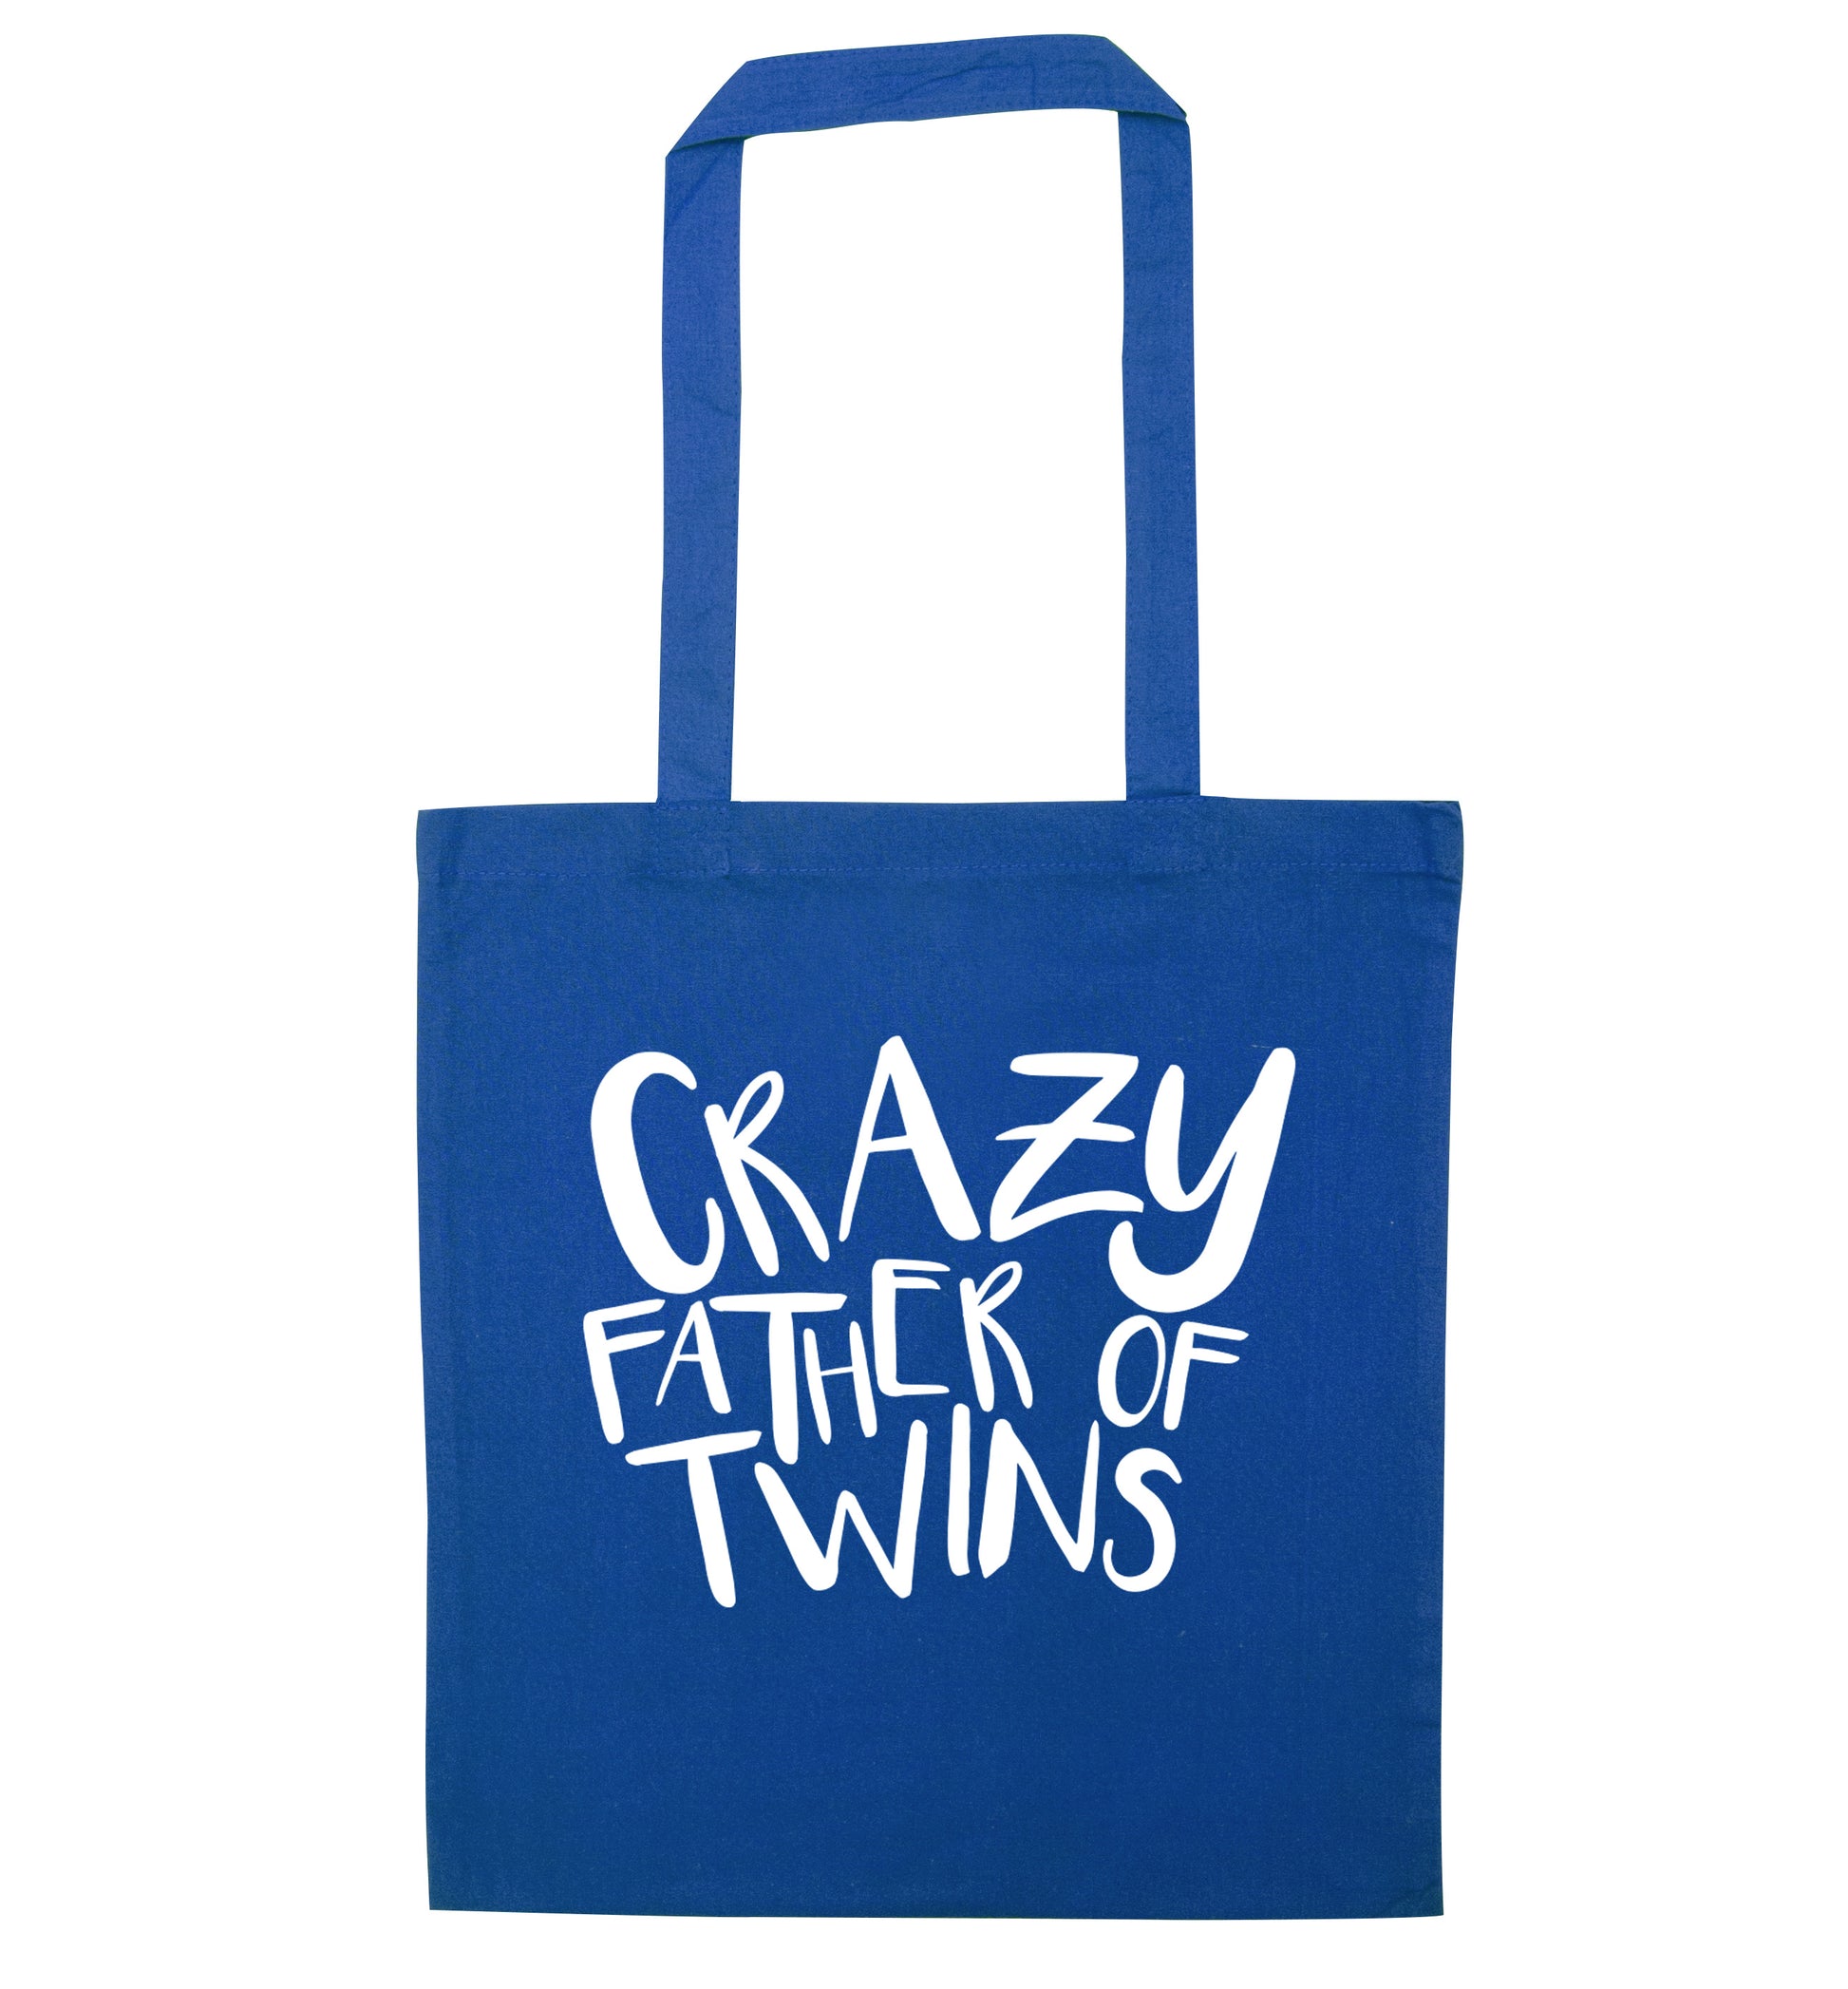 Crazy father of twins blue tote bag